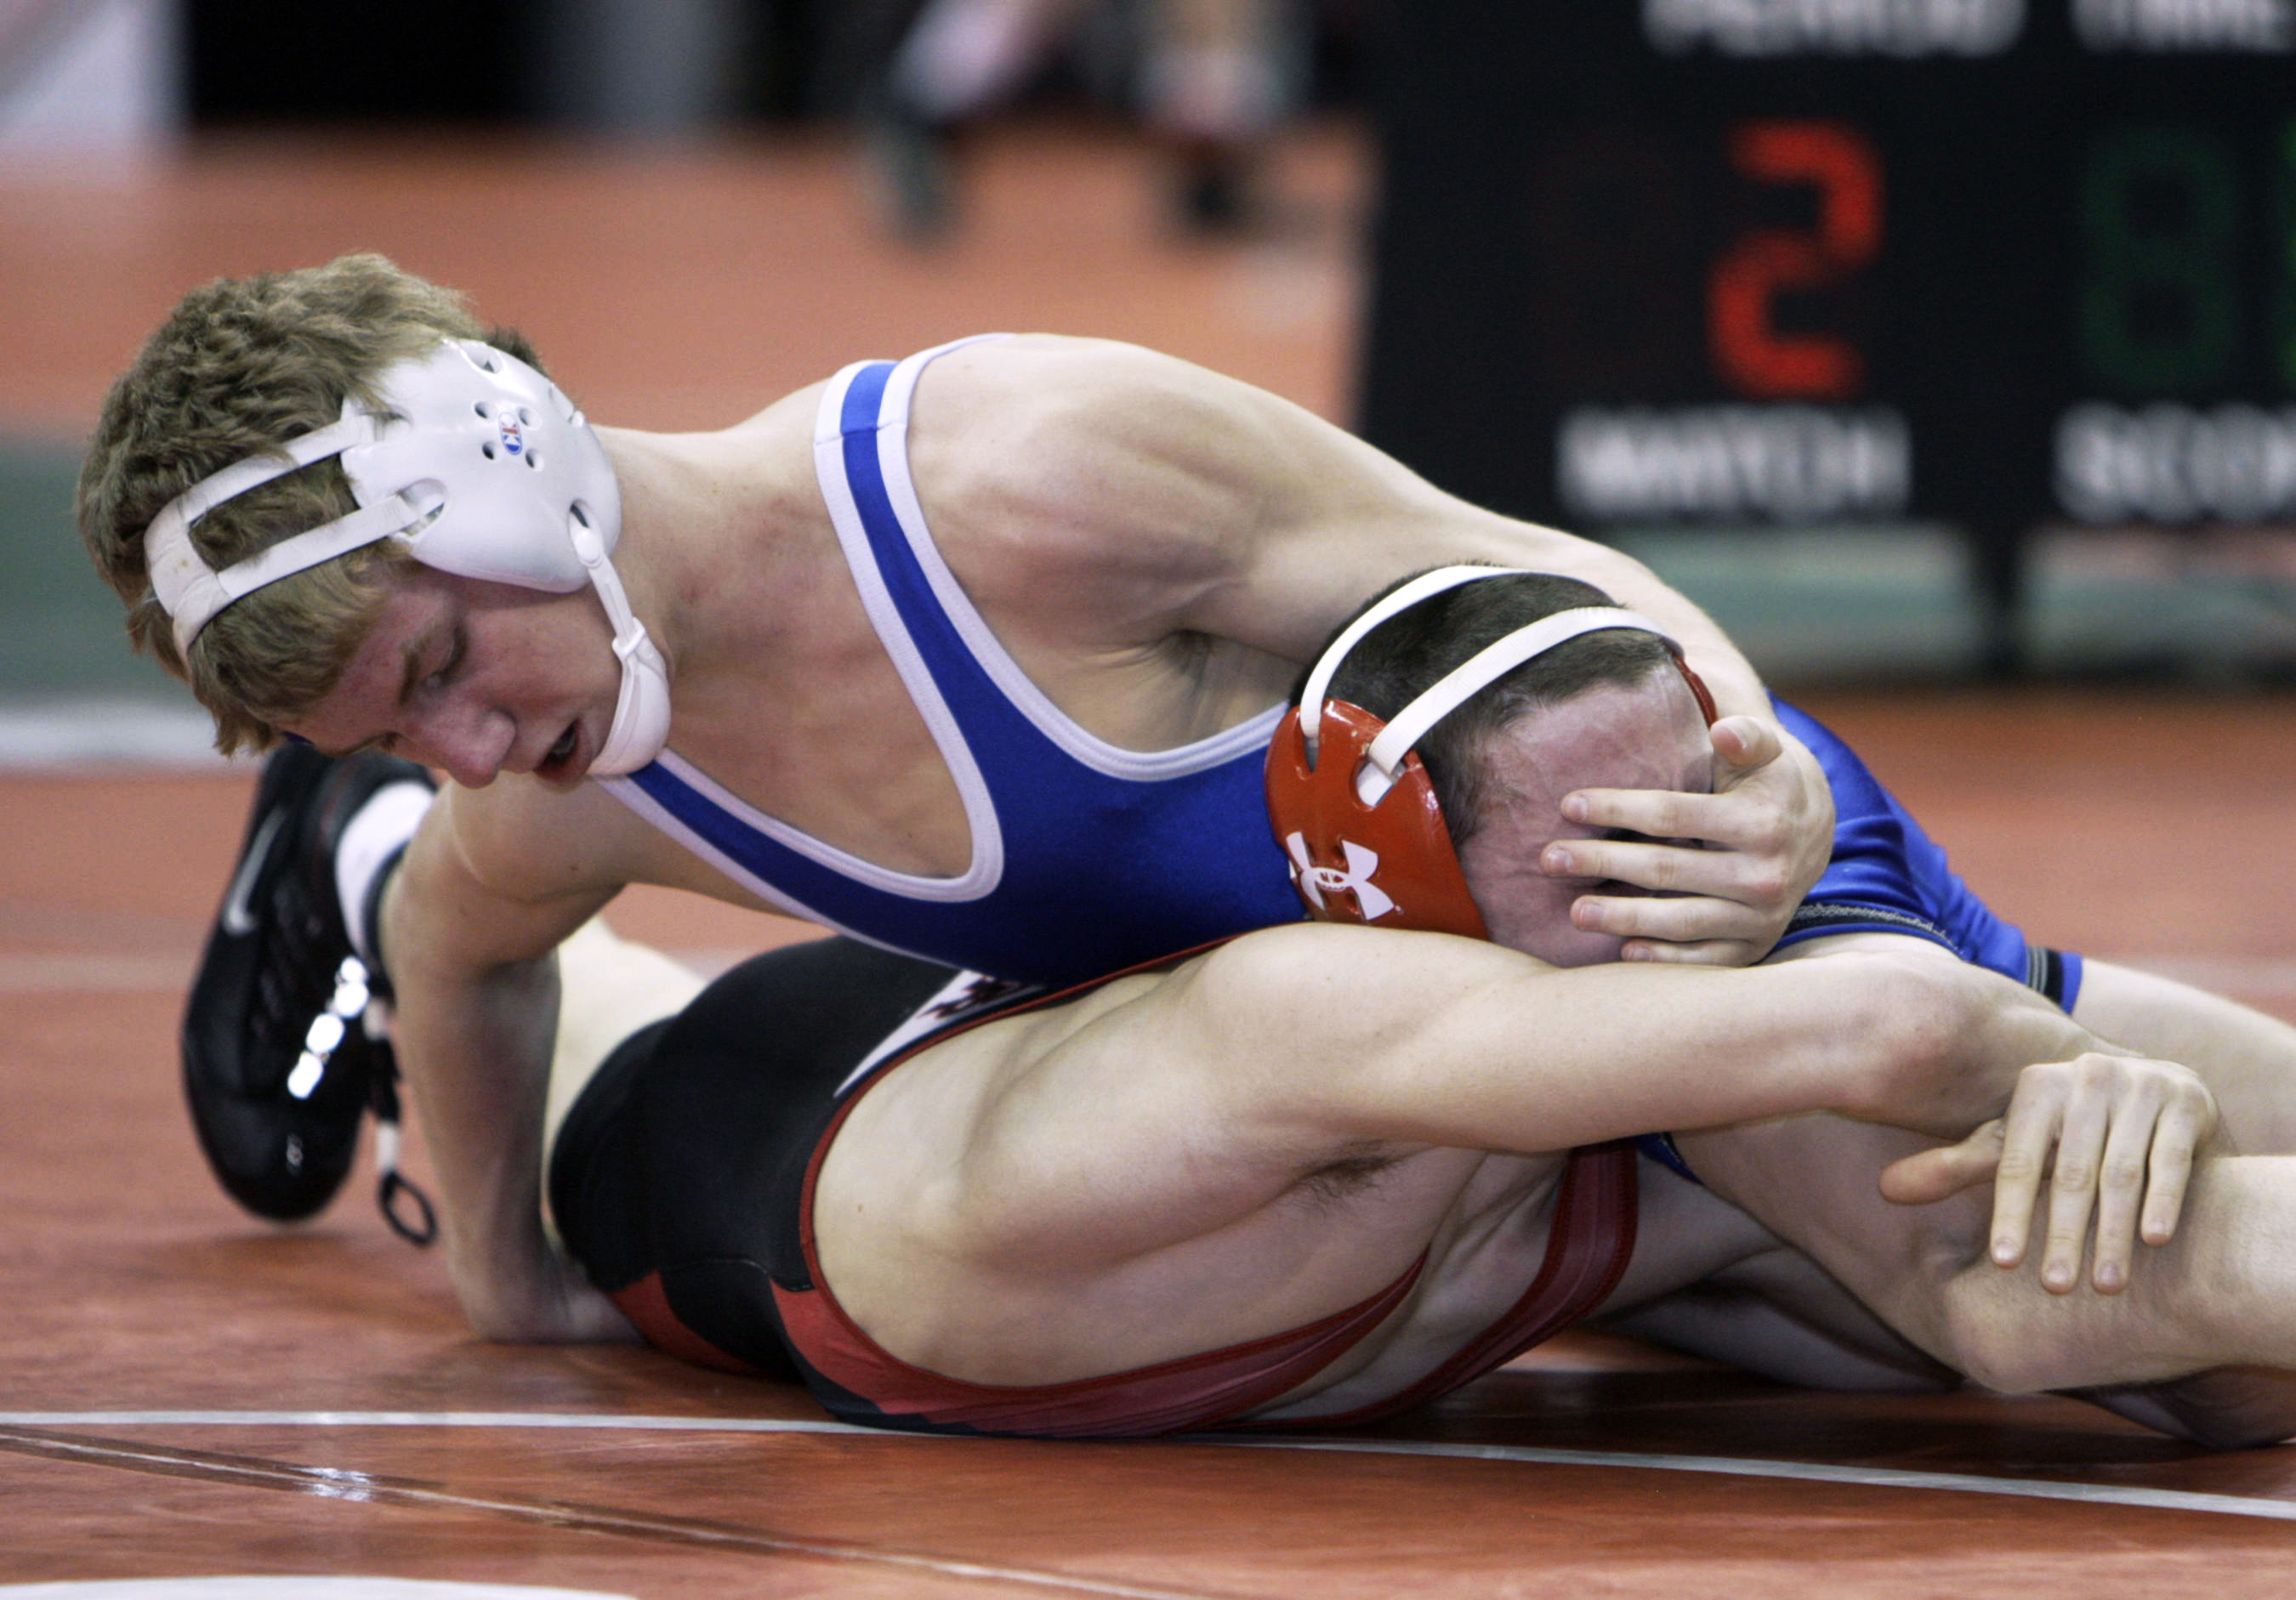 Sidelines: Champions and winners at state wrestling meet - The Blade